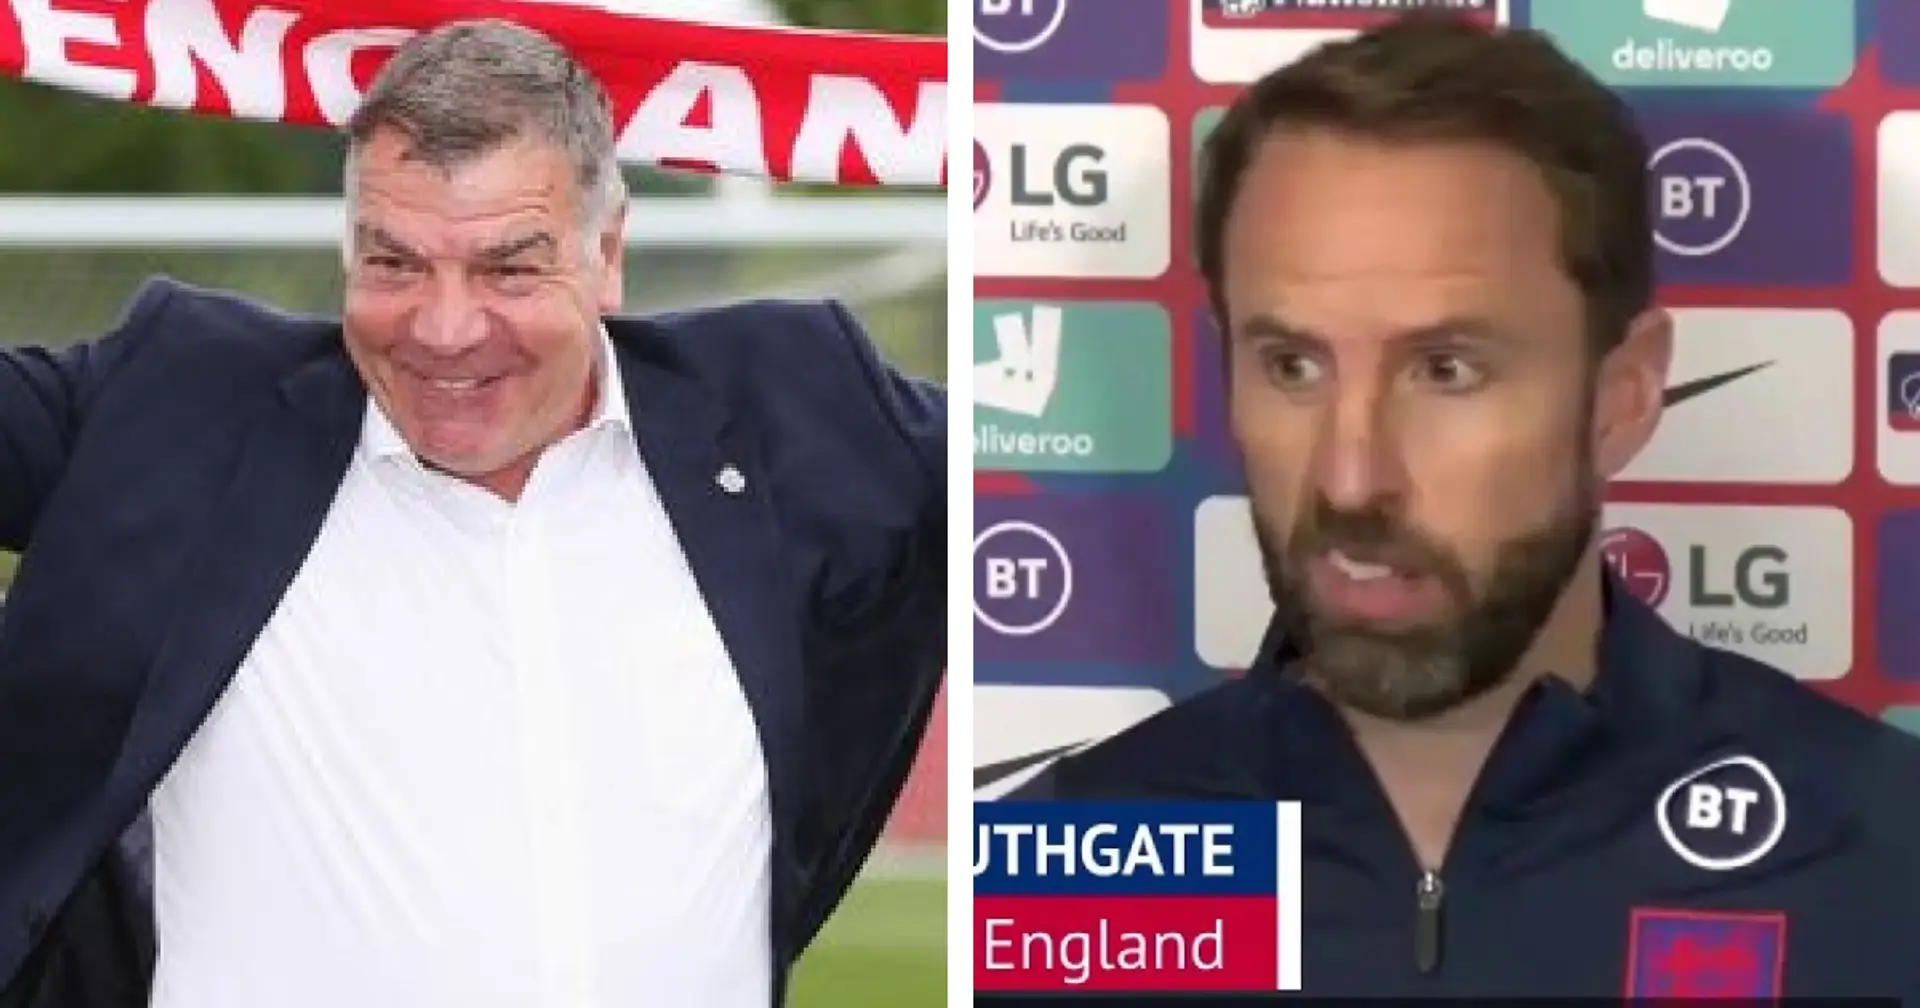 'It had been s***e for years before him': Carragher defends Southgate amid criticism from fans for dropping Trent